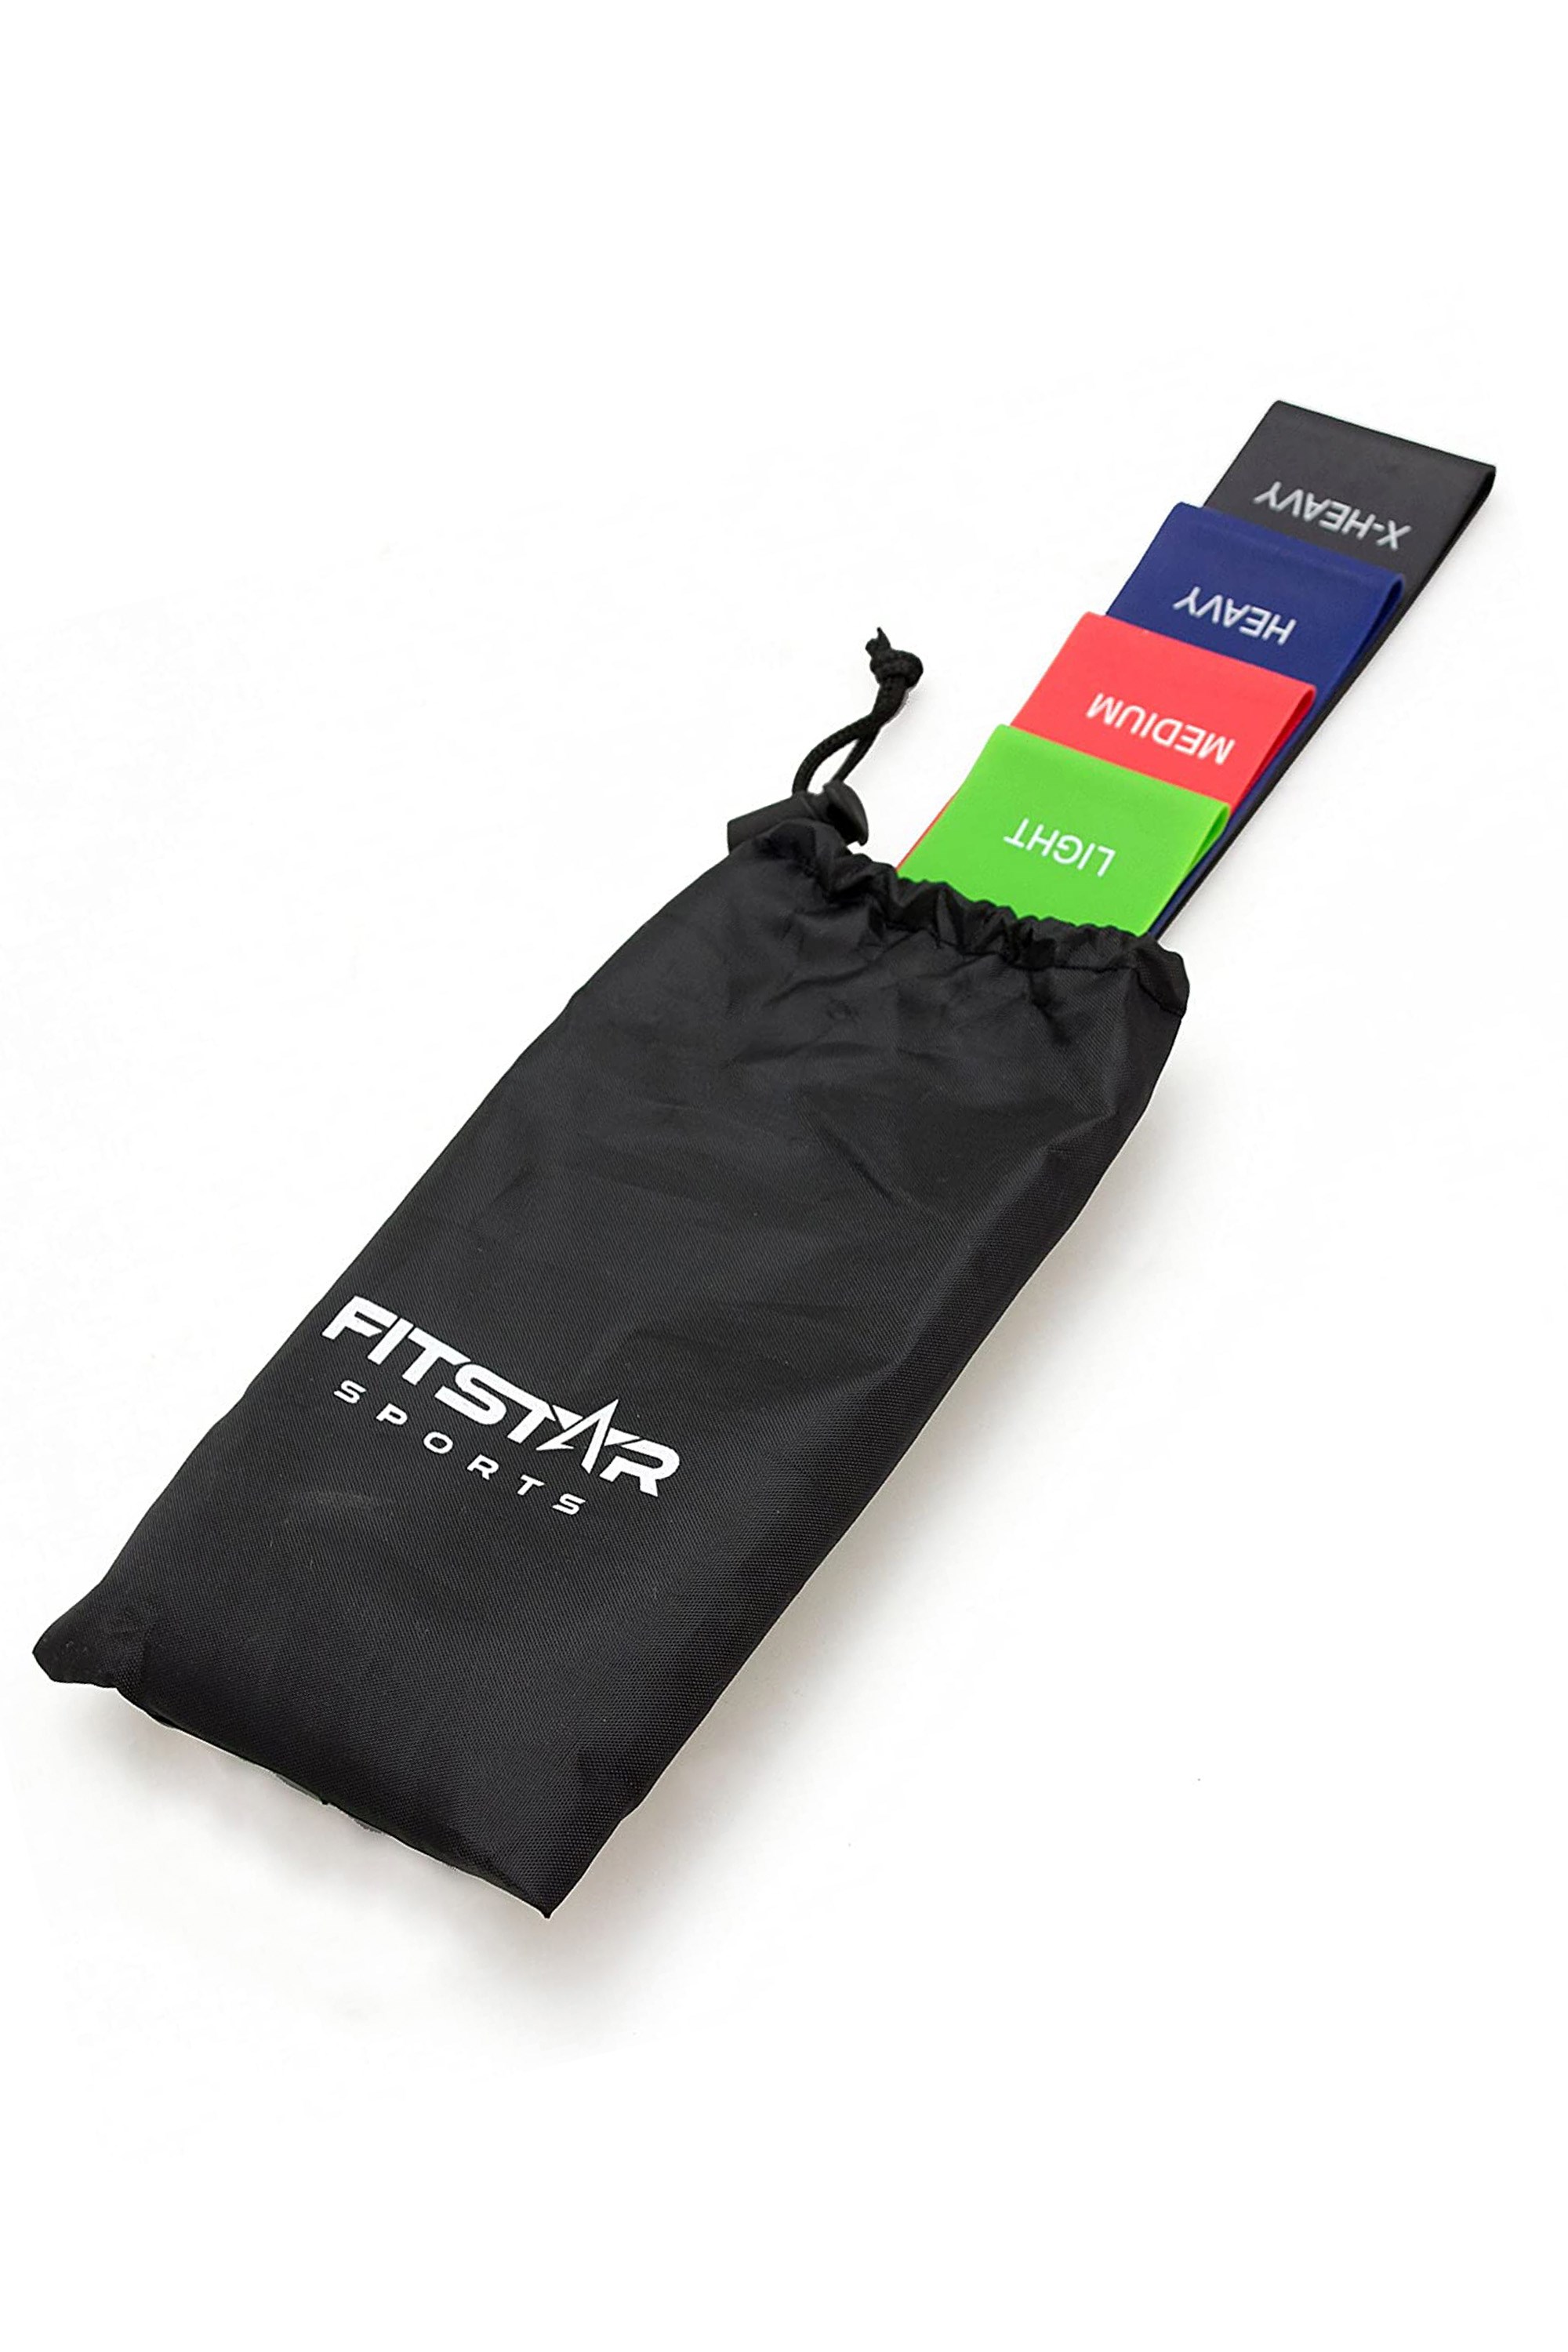 Exercise Resistance Bands 4-pack -